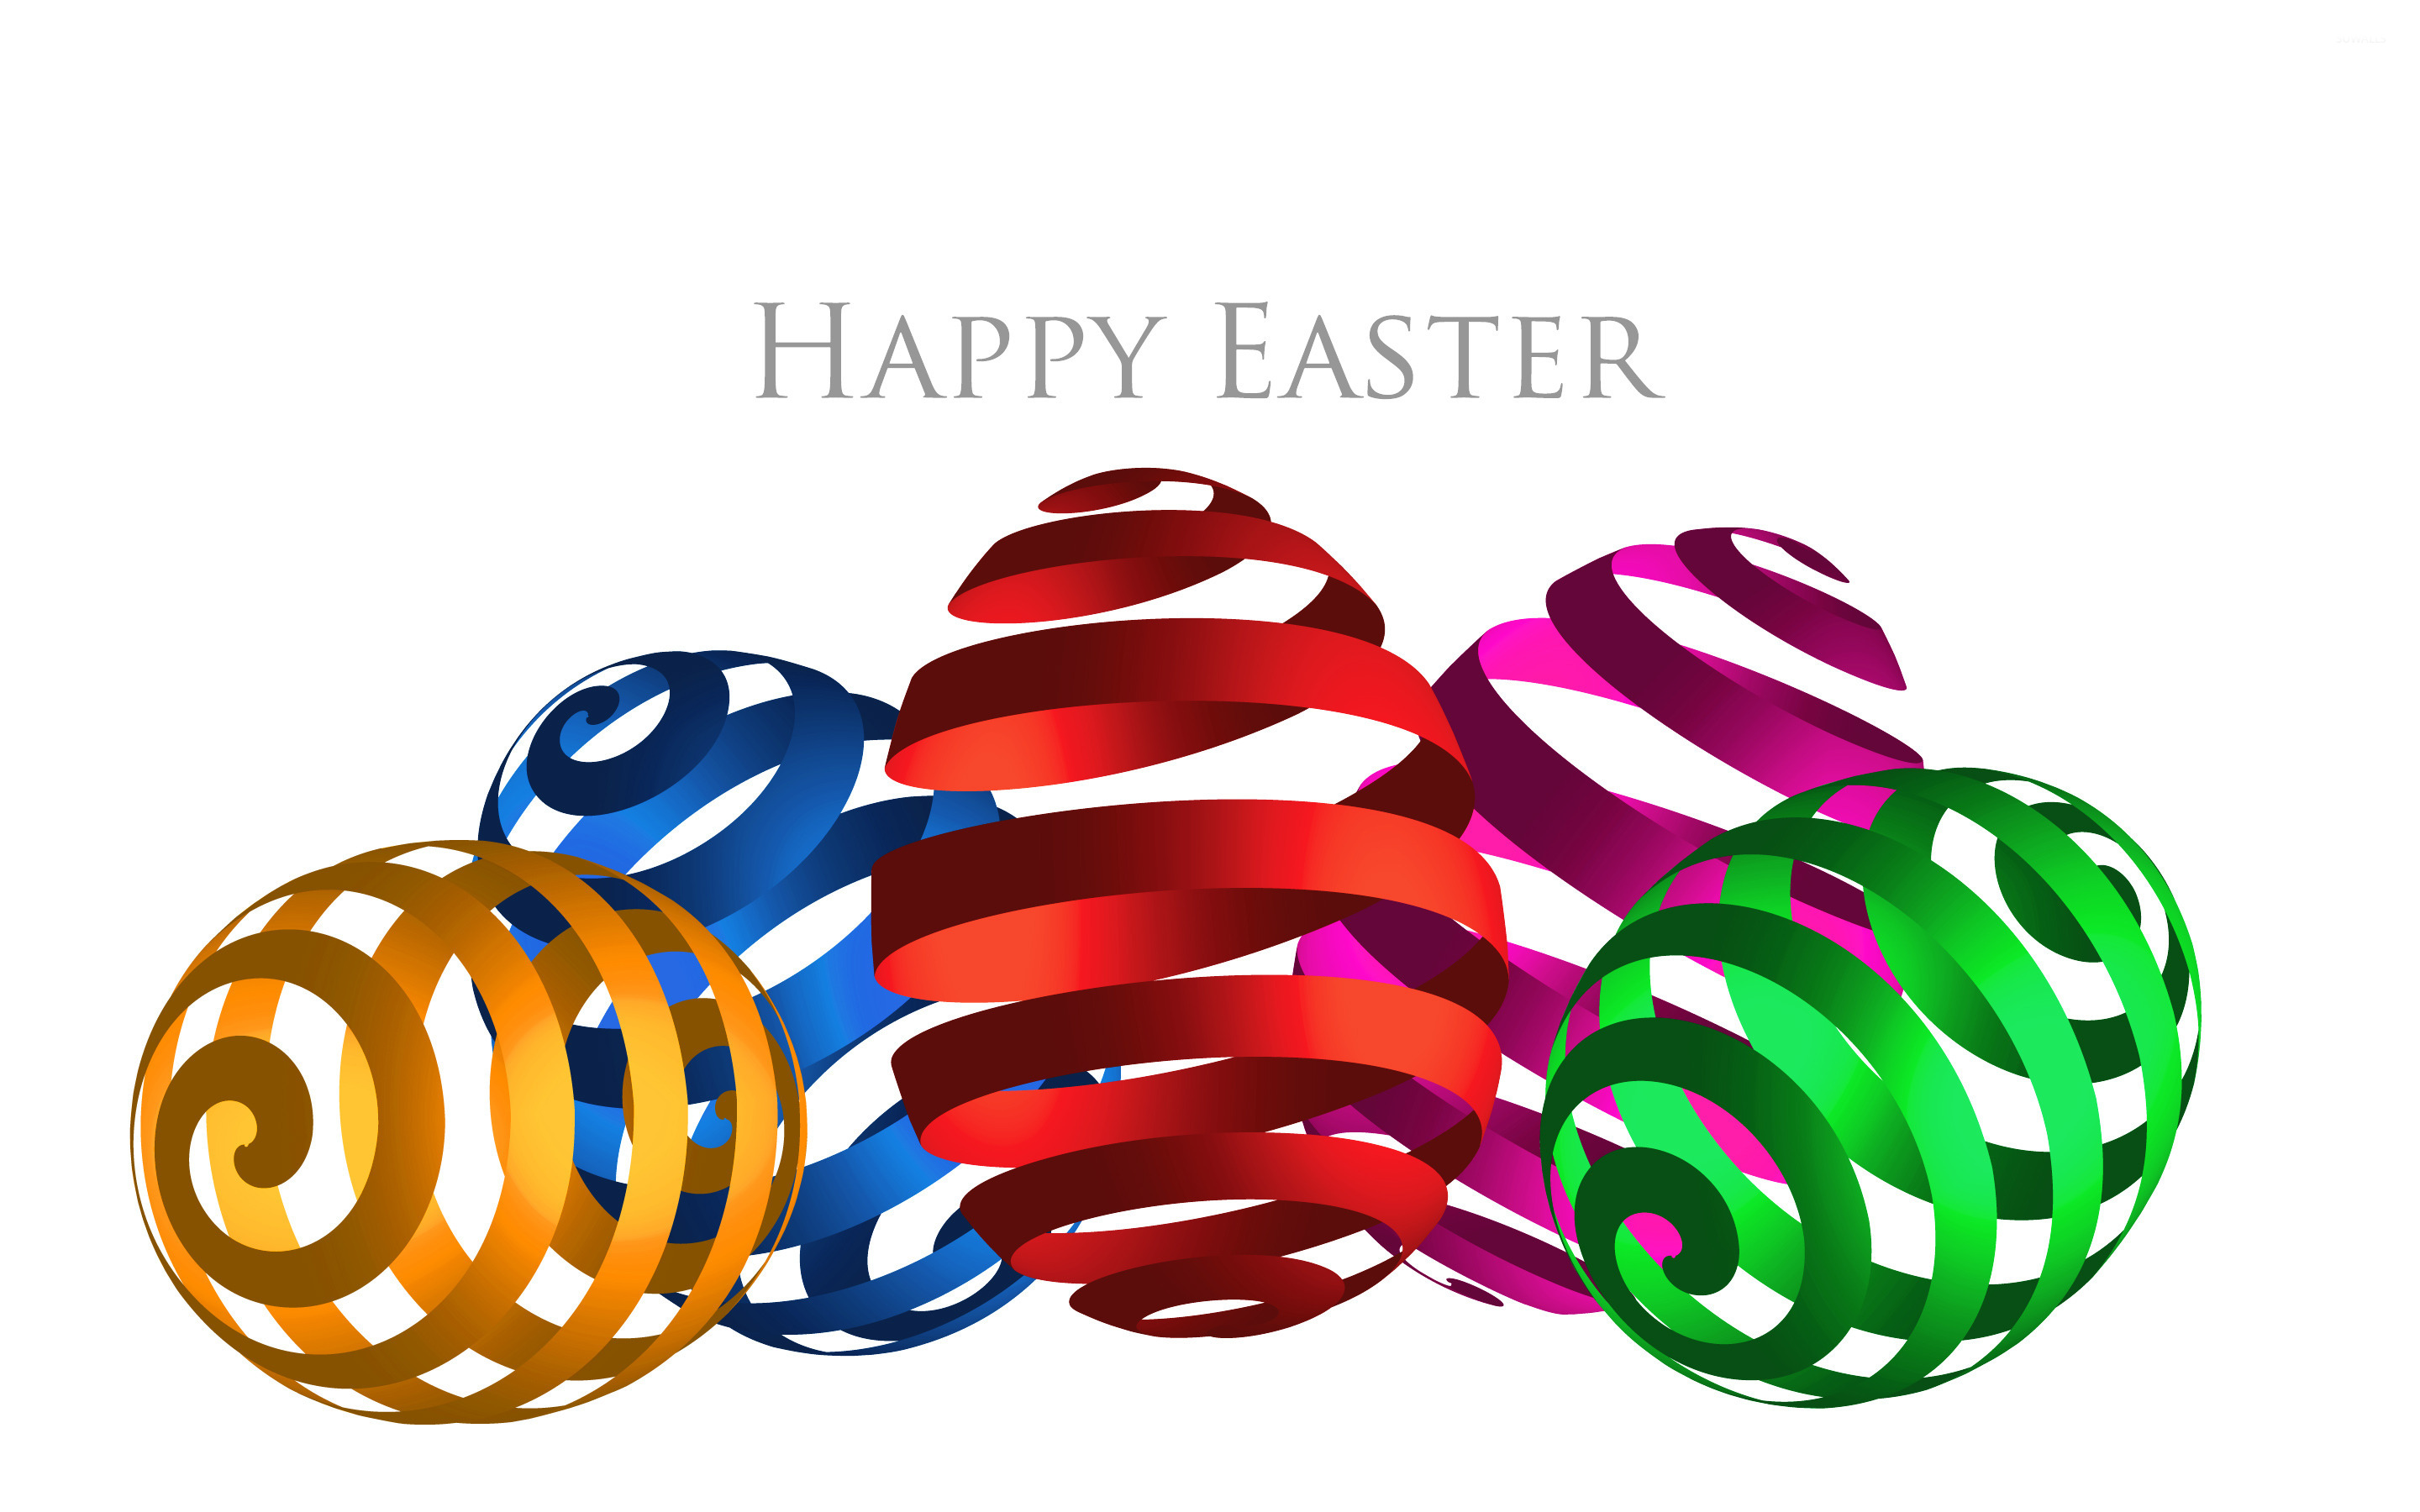 Happy Easter wallpaper   Holiday wallpapers   29854